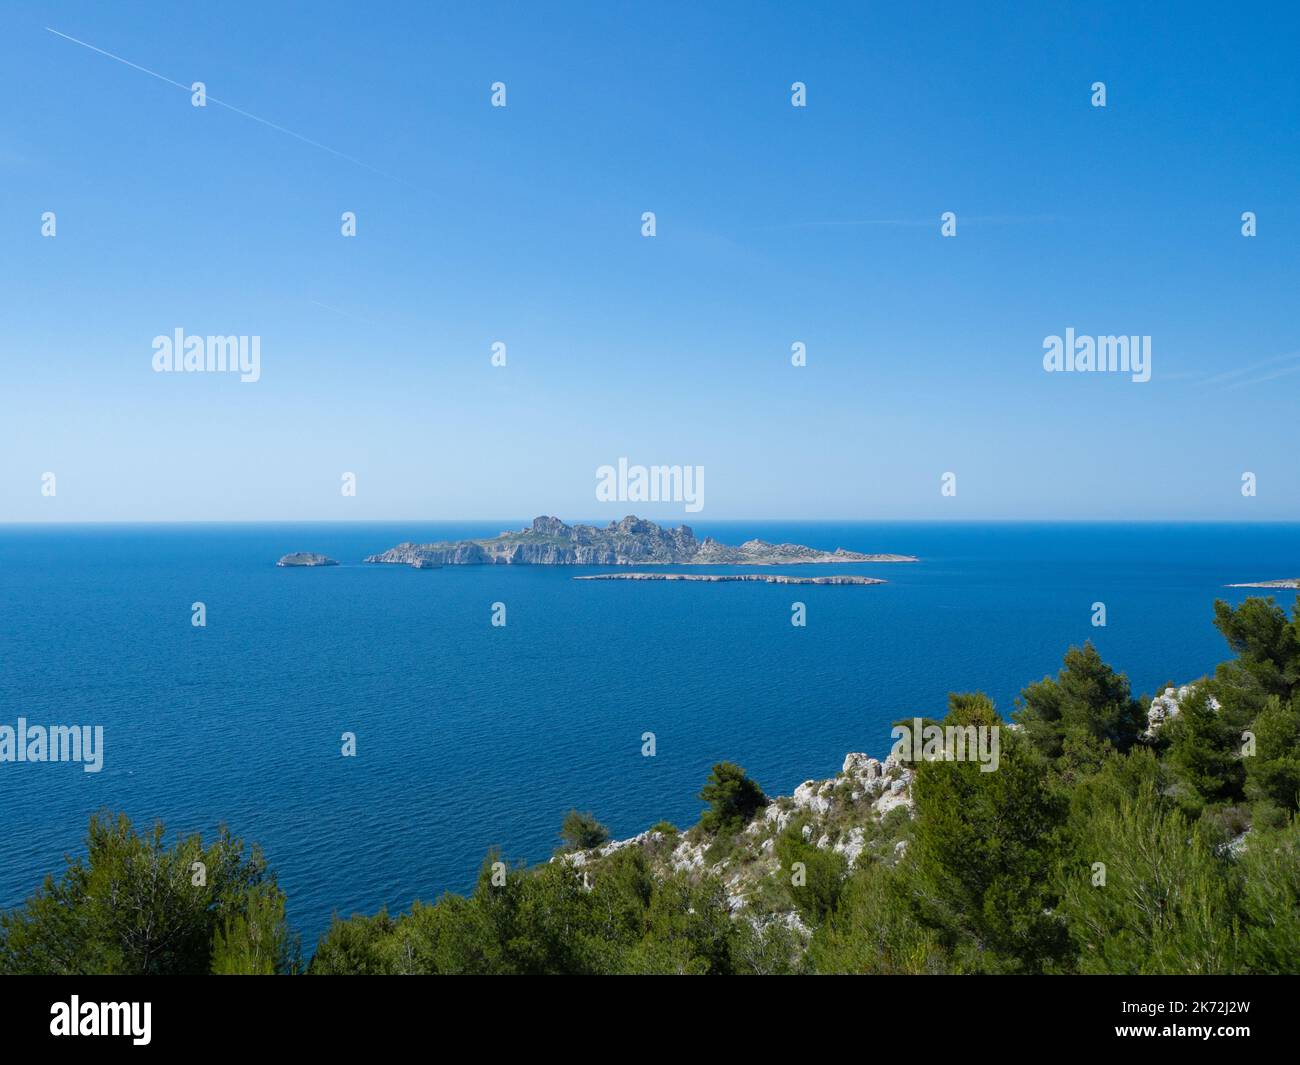 Calanques, France - May 20th 2020: Hiking high above the Mediterranean Sea along a rocky coast Stock Photo